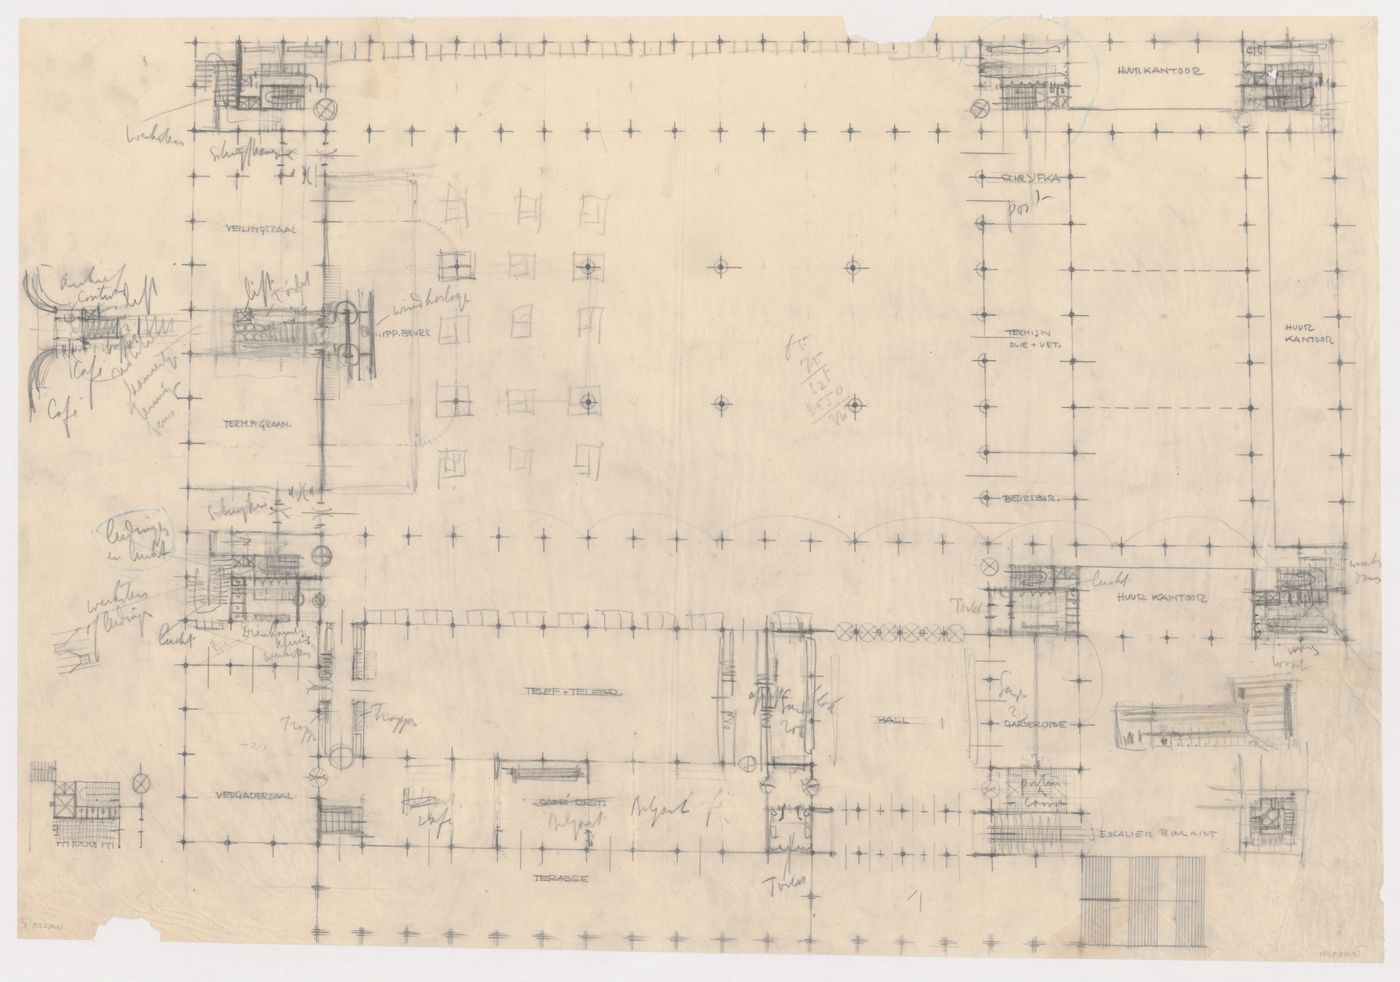 Plan and partial plans for the main level and sketch elevation for the principal façade for the New Stock Exchange Building, Rotterdam, Netherlands